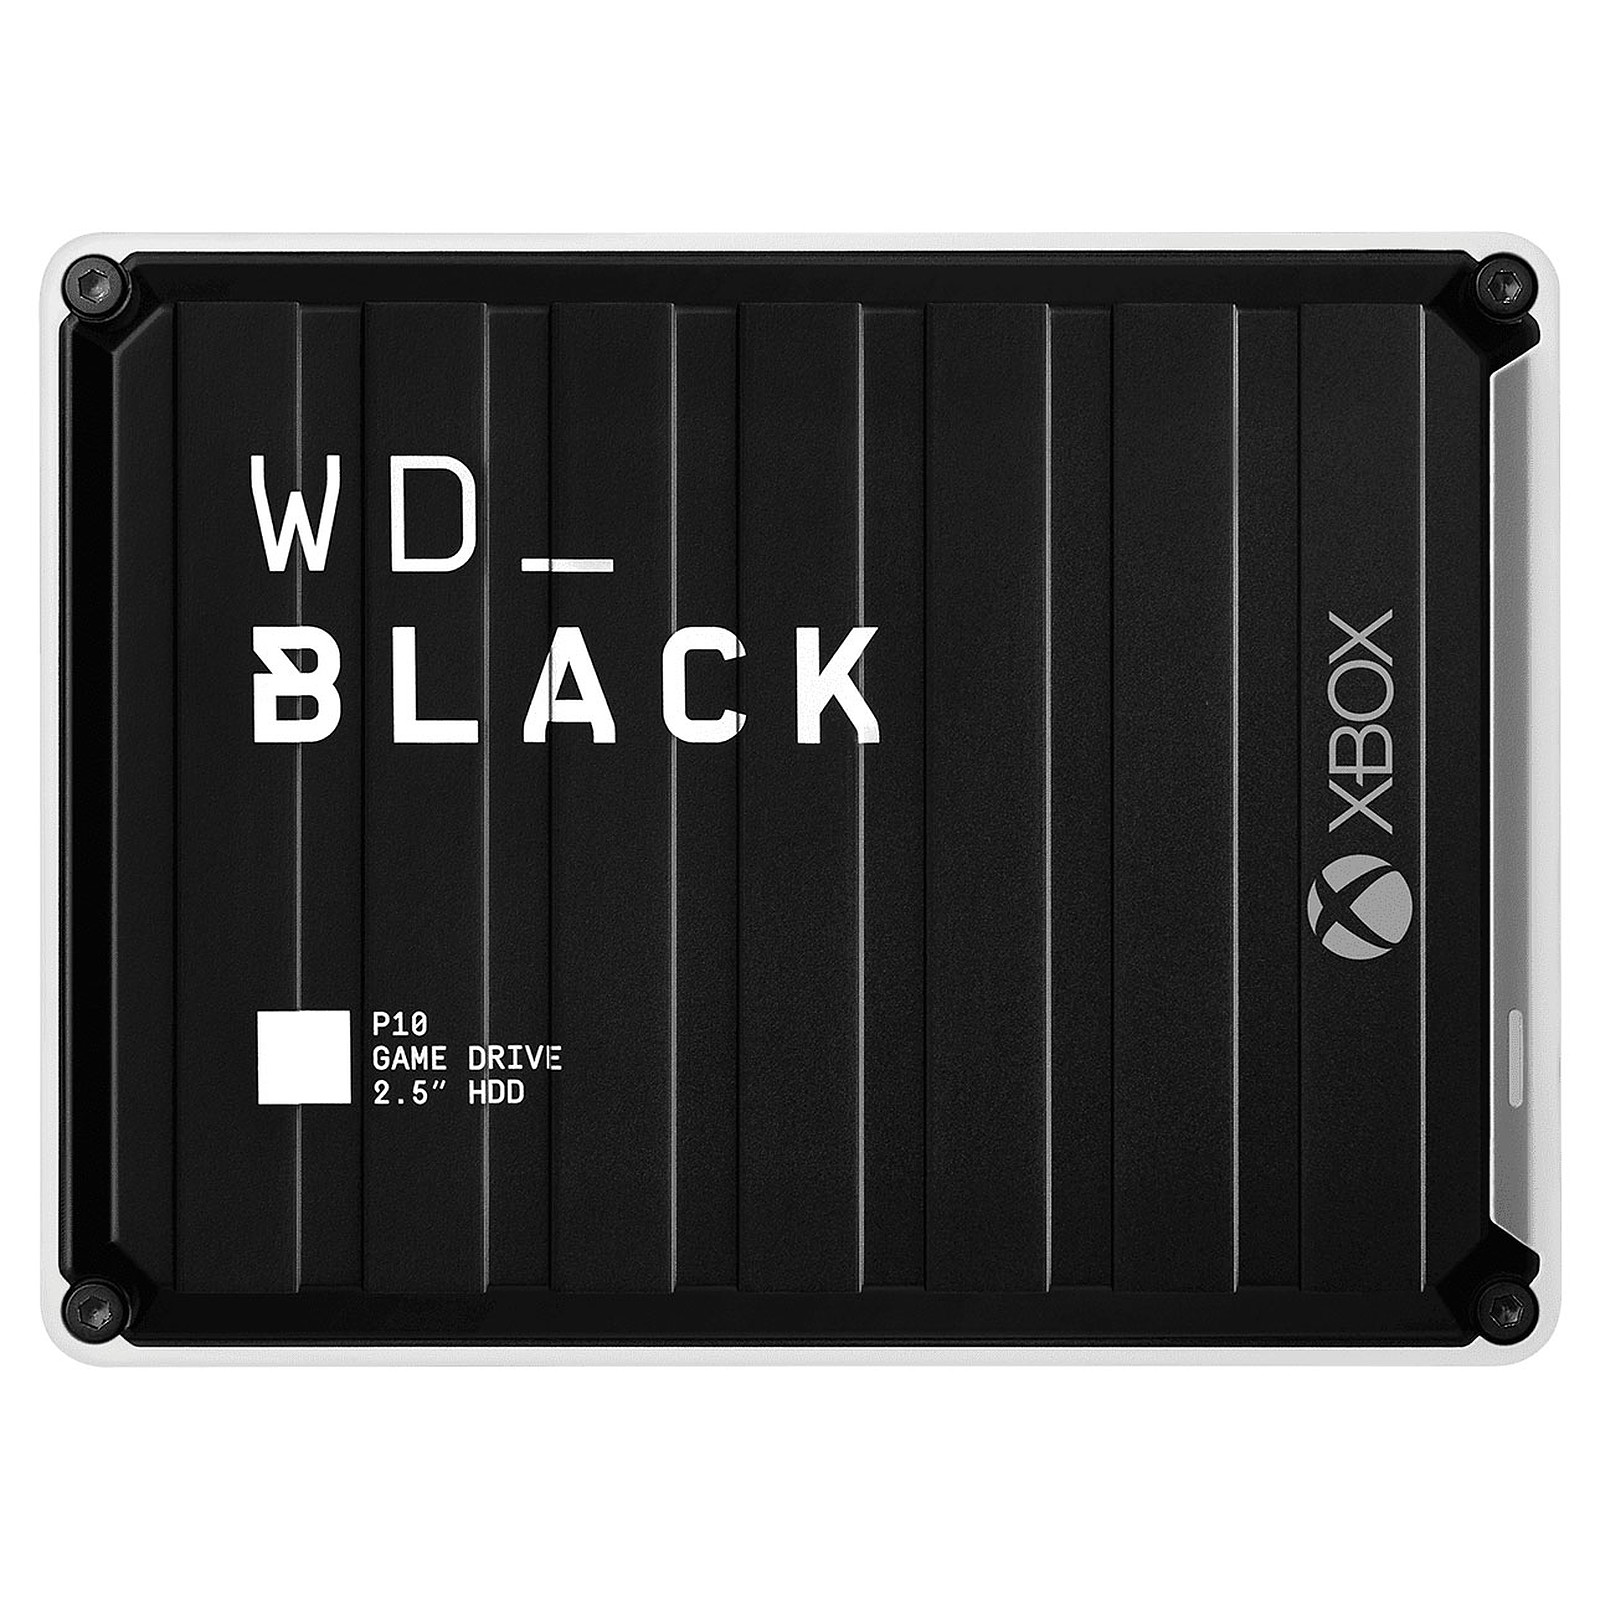 WD_Black P10 Game Drive for Xbox One 5 To - Disque dur externe WD_Black